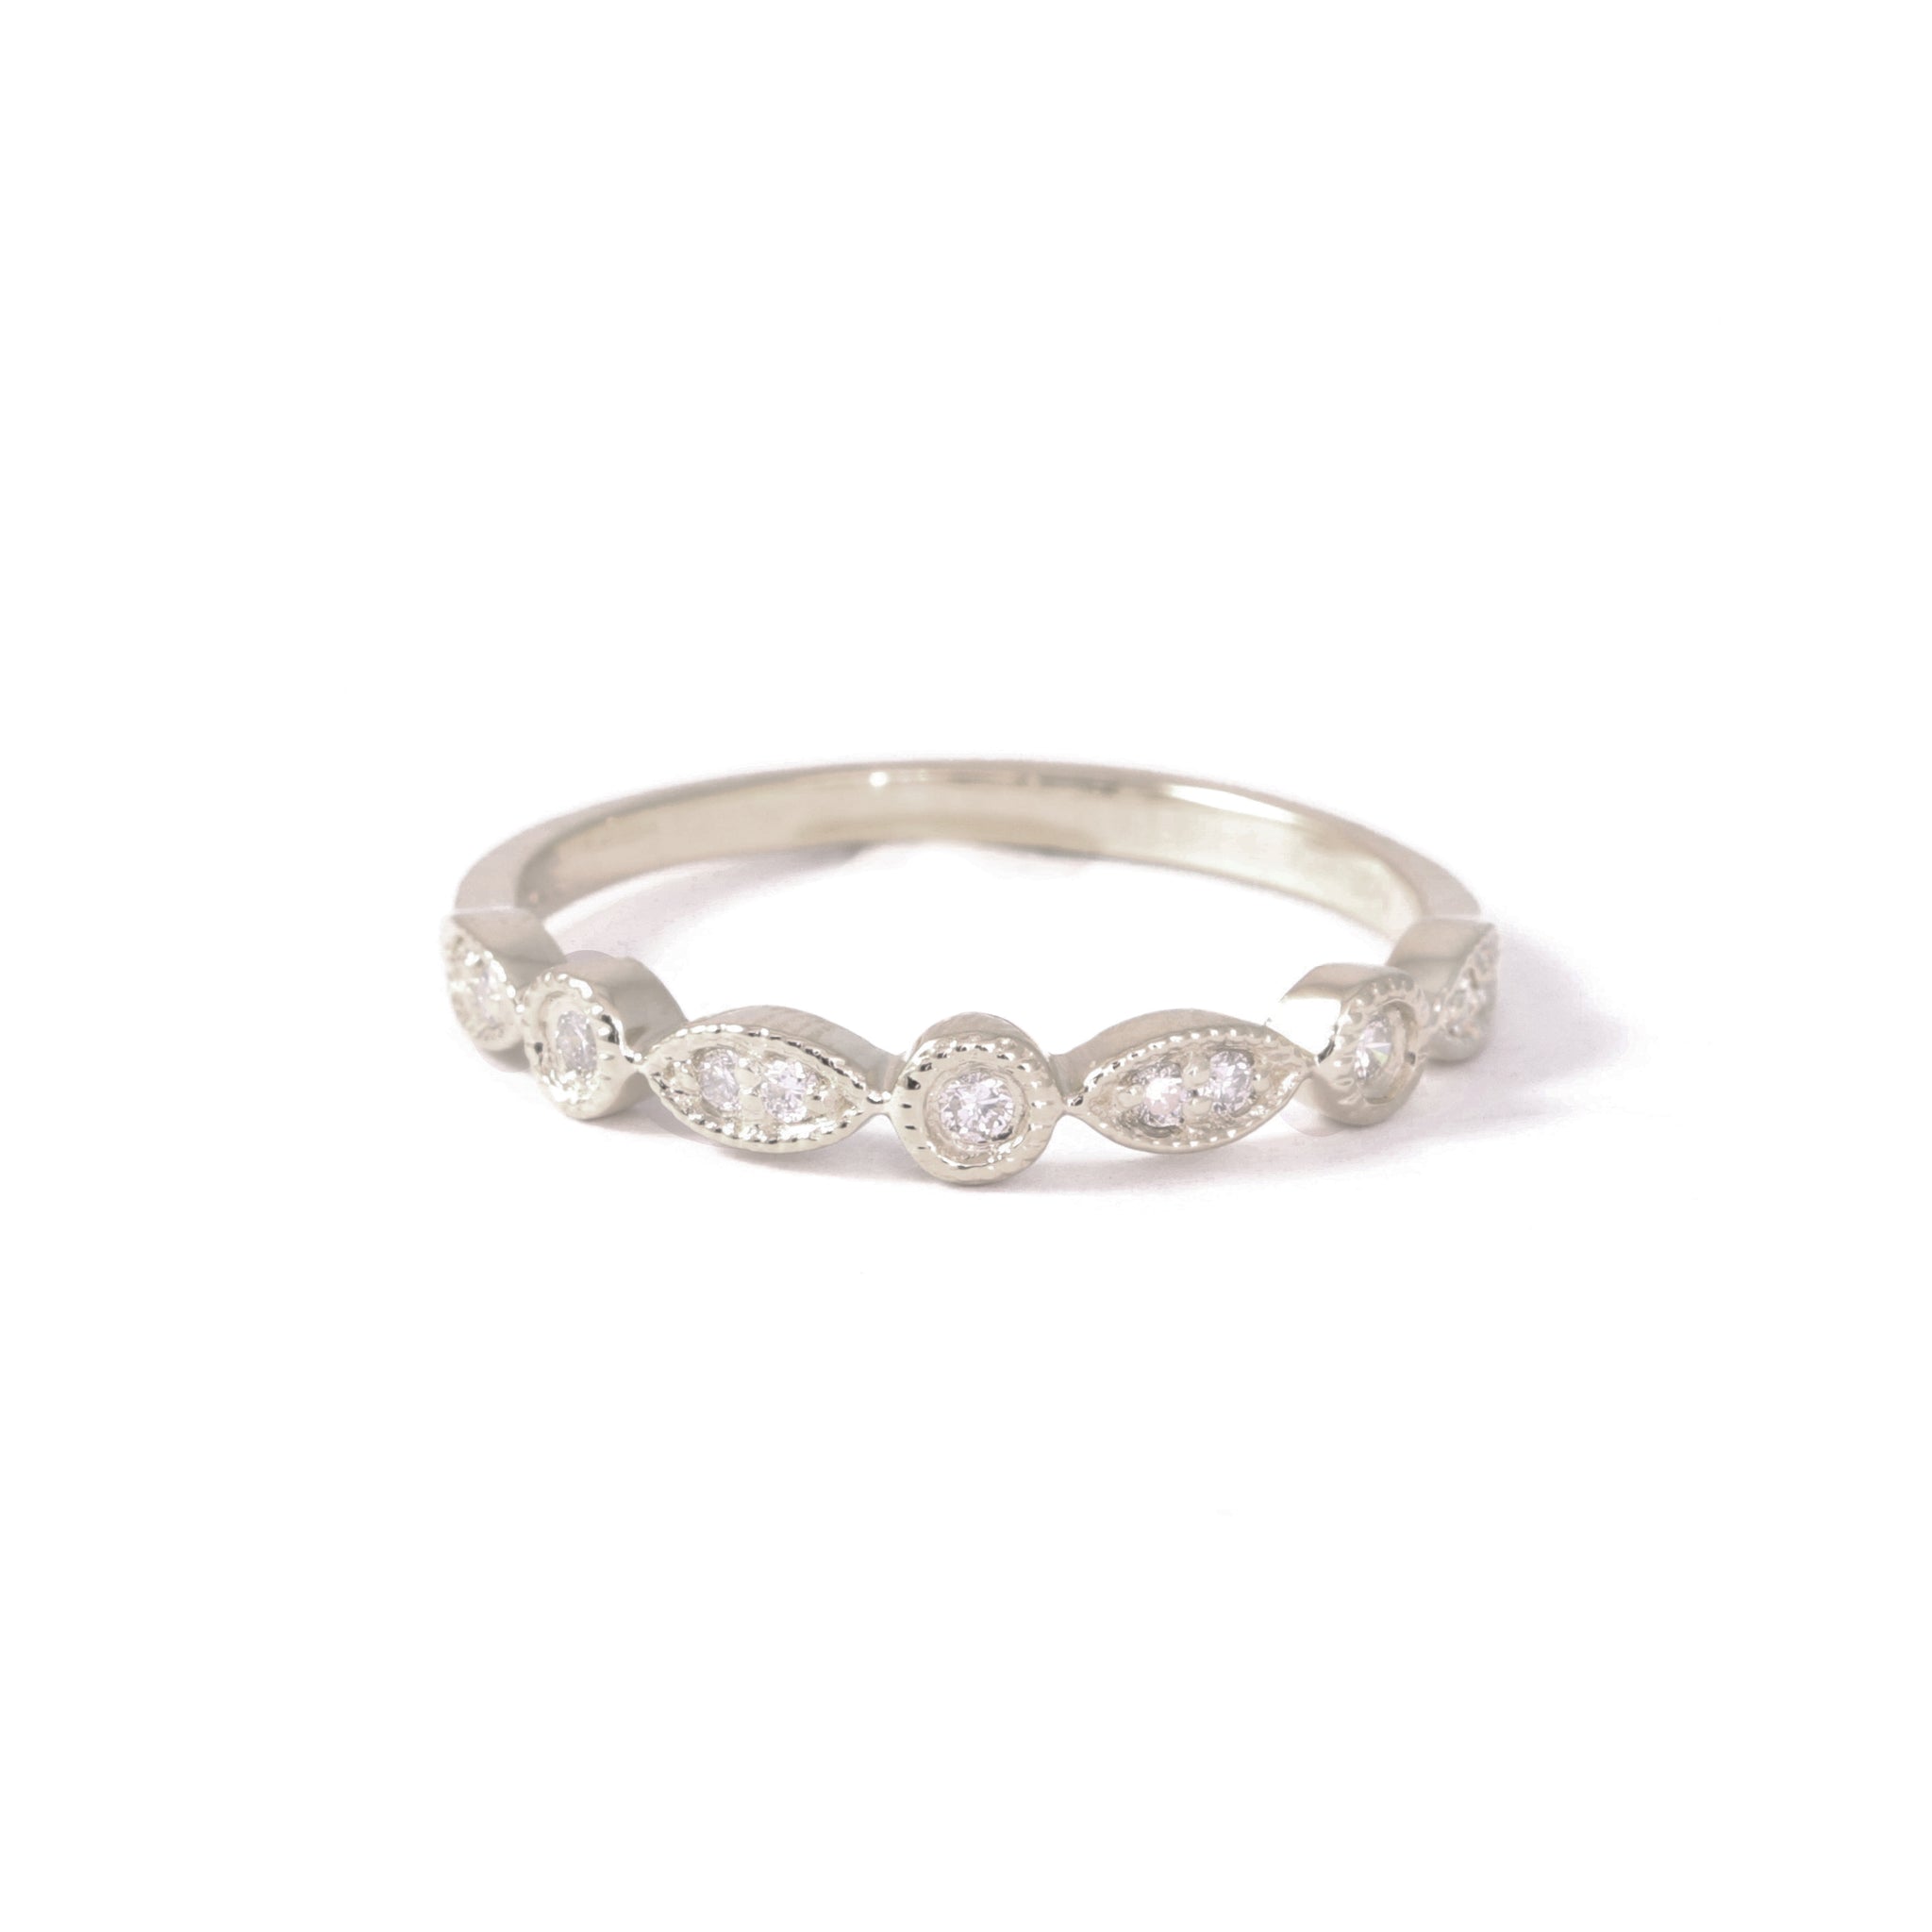 Vintage Diamond Eternity Ring In 9ct White Gold